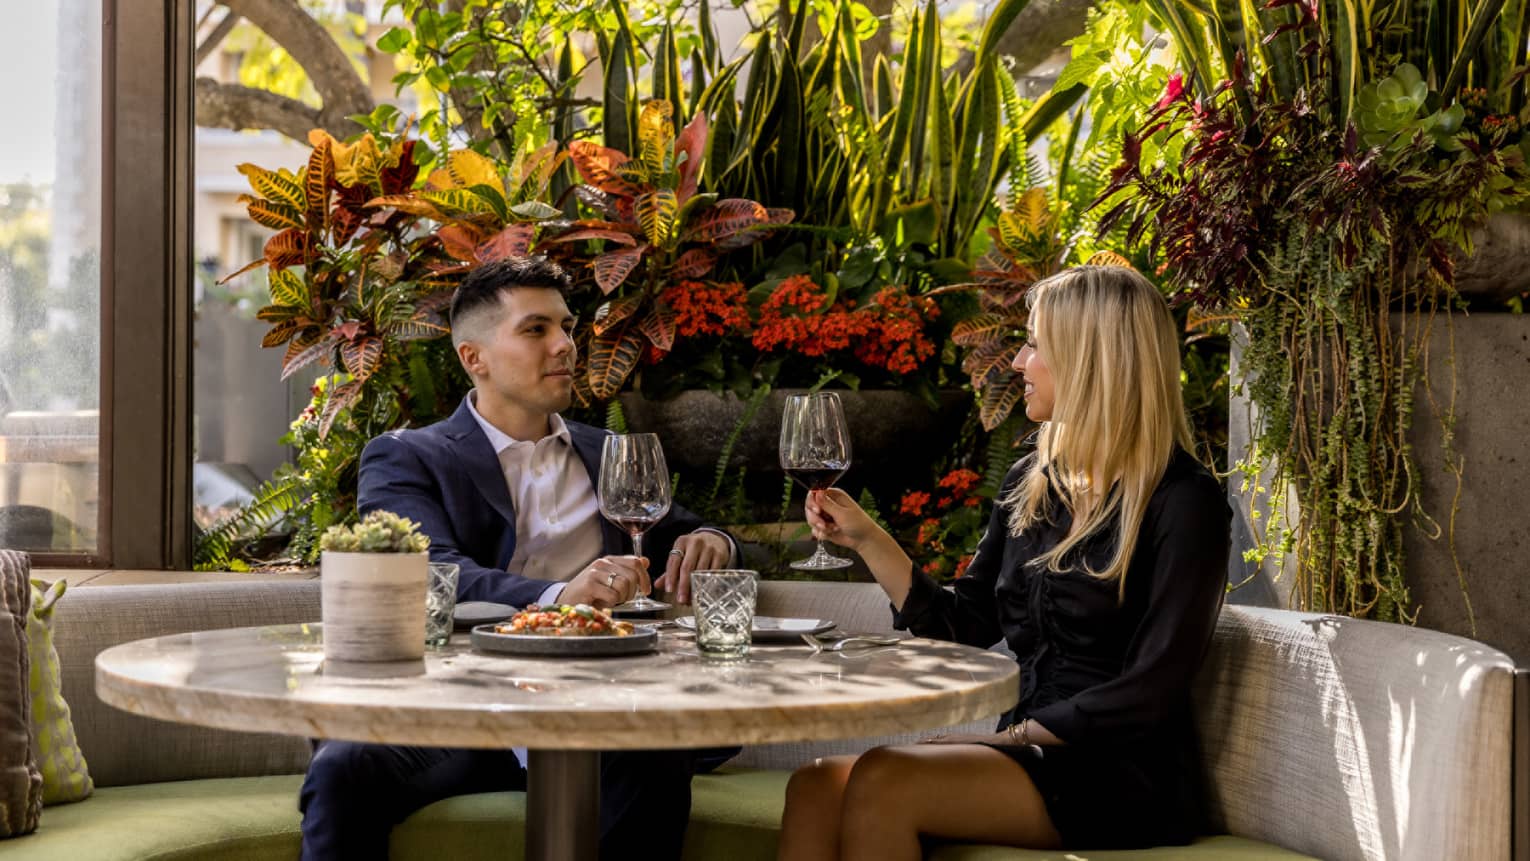 A man and woman sitting near flowers drinking wine.